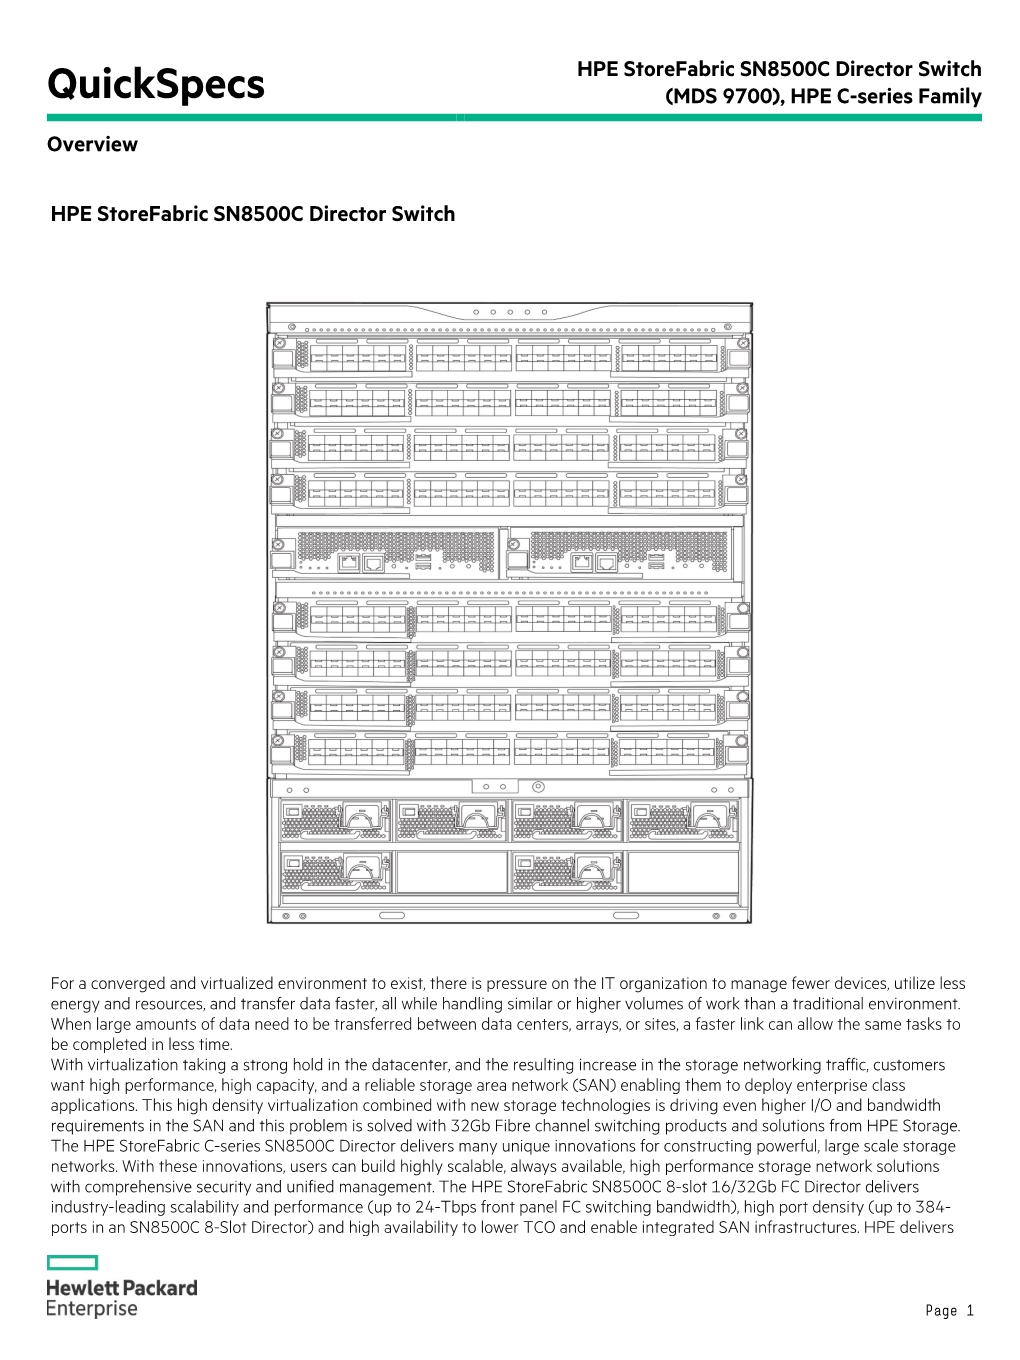 HPE Storefabric SN8500C Director Switch (MDS 9700), Quickspecs HPE C-Series Family Overview